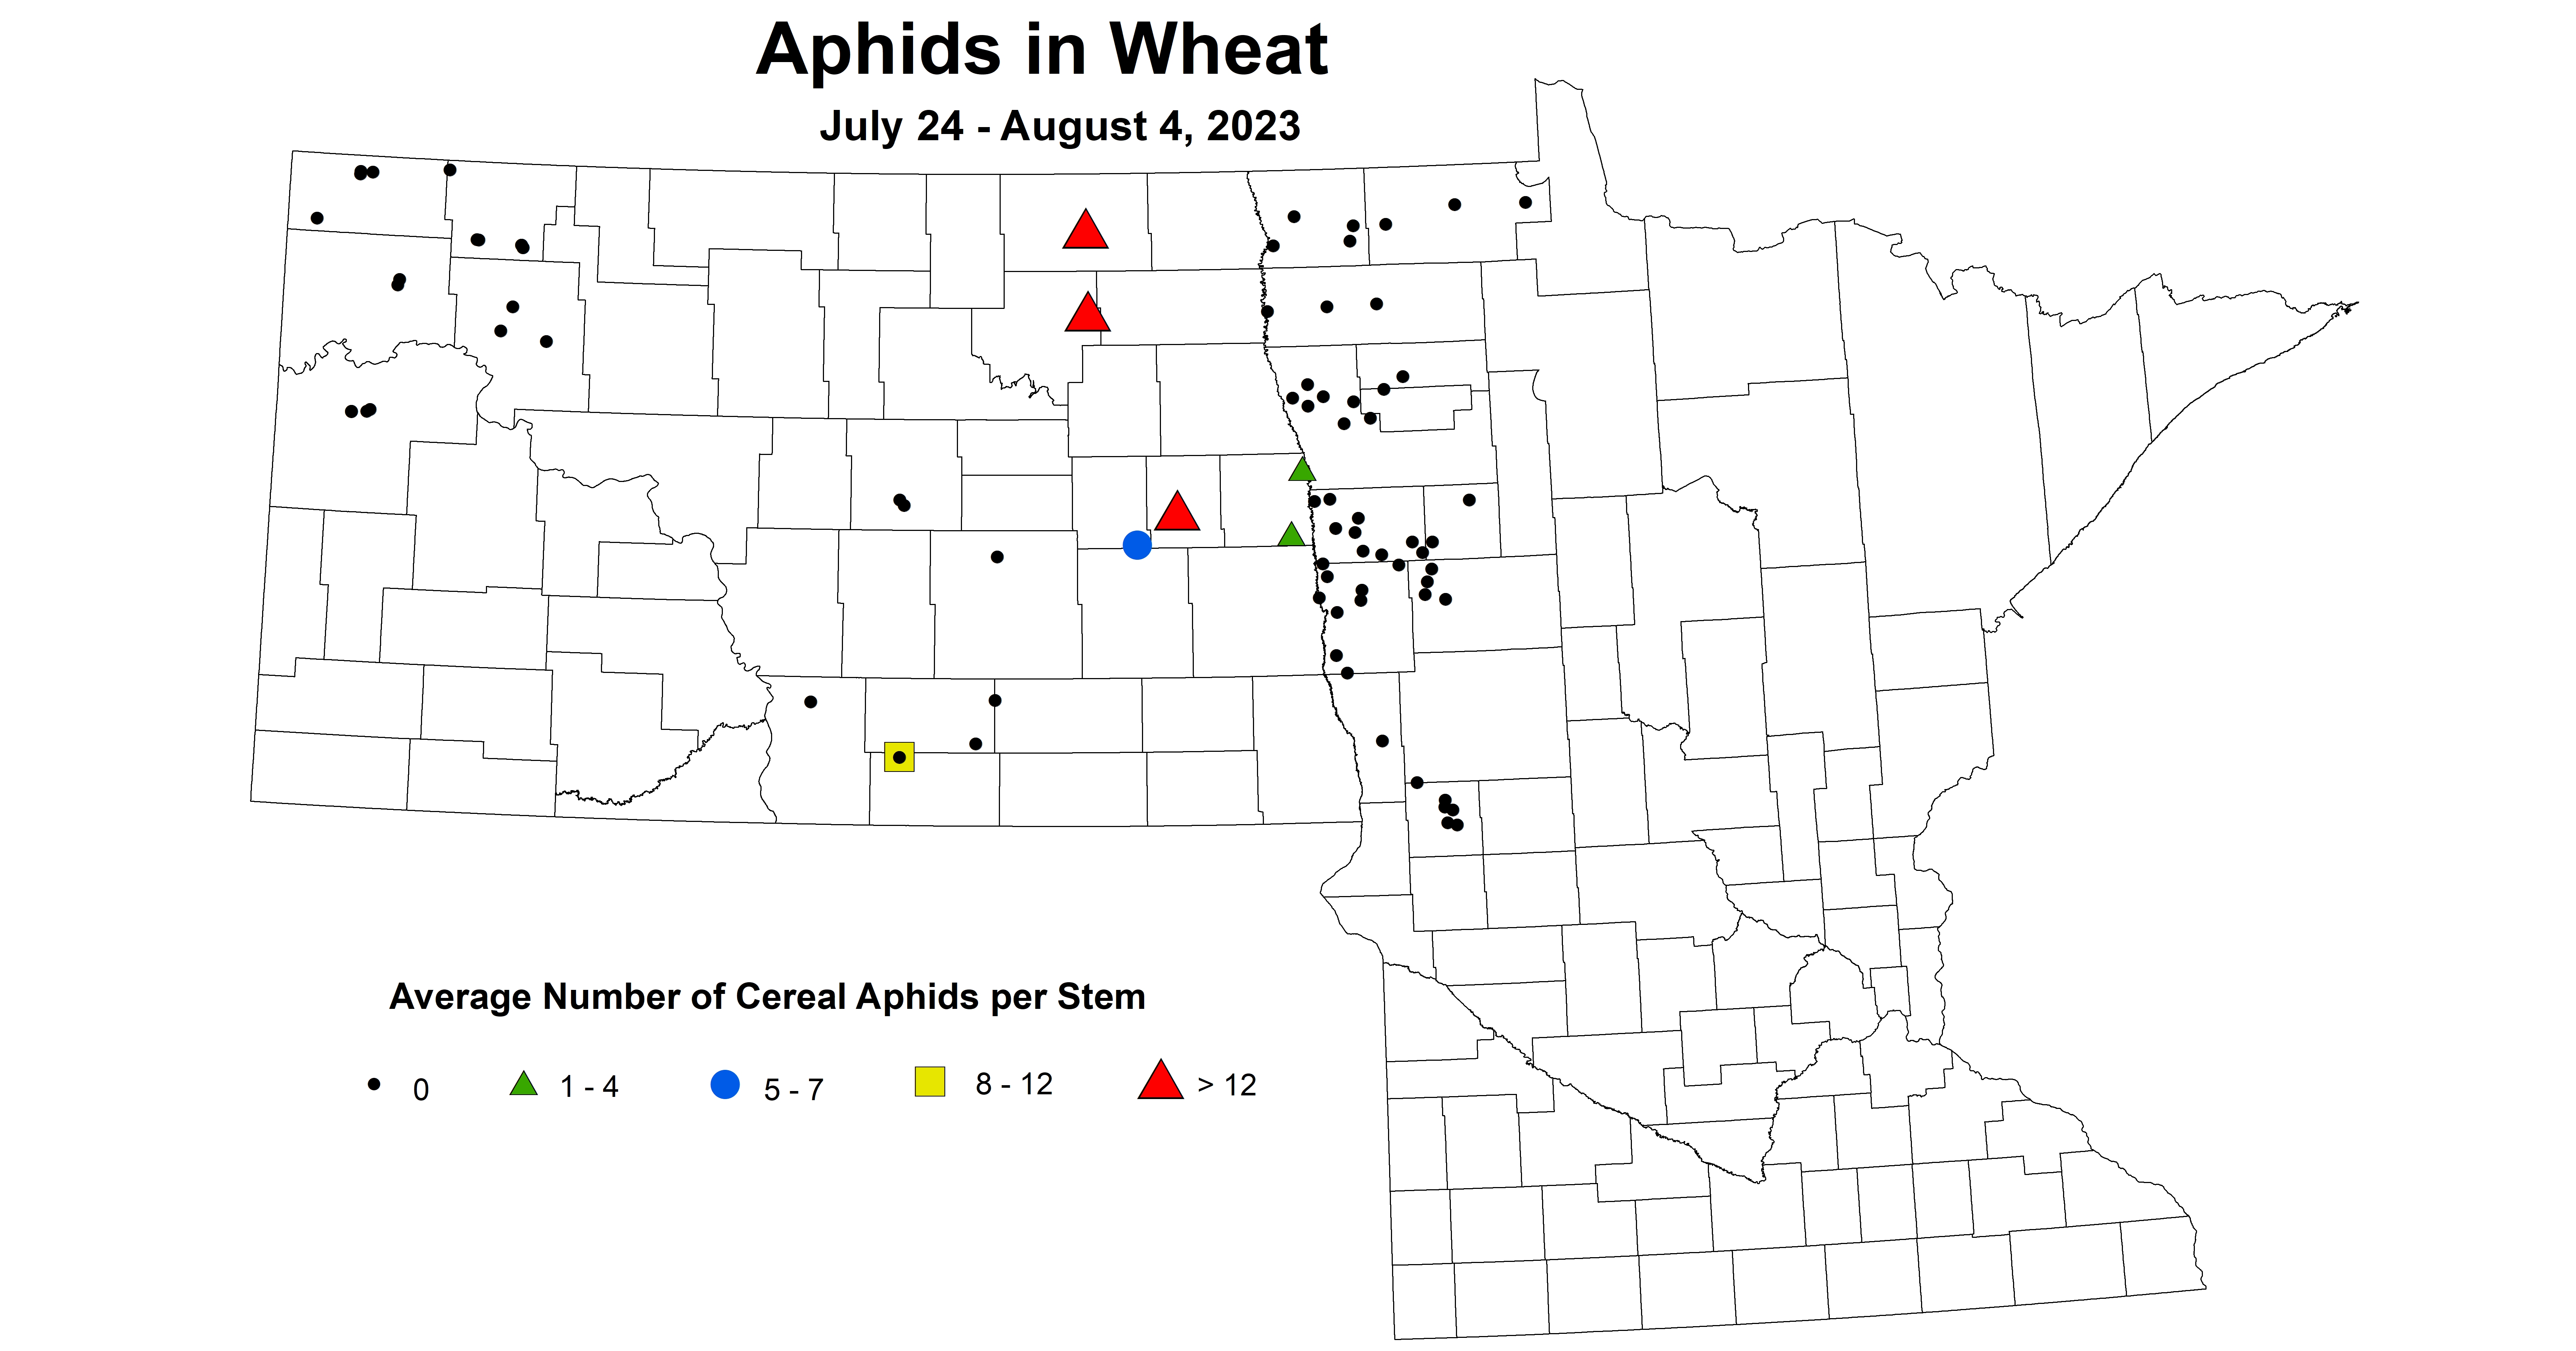 wheat aphids 7.24-8.4 2023